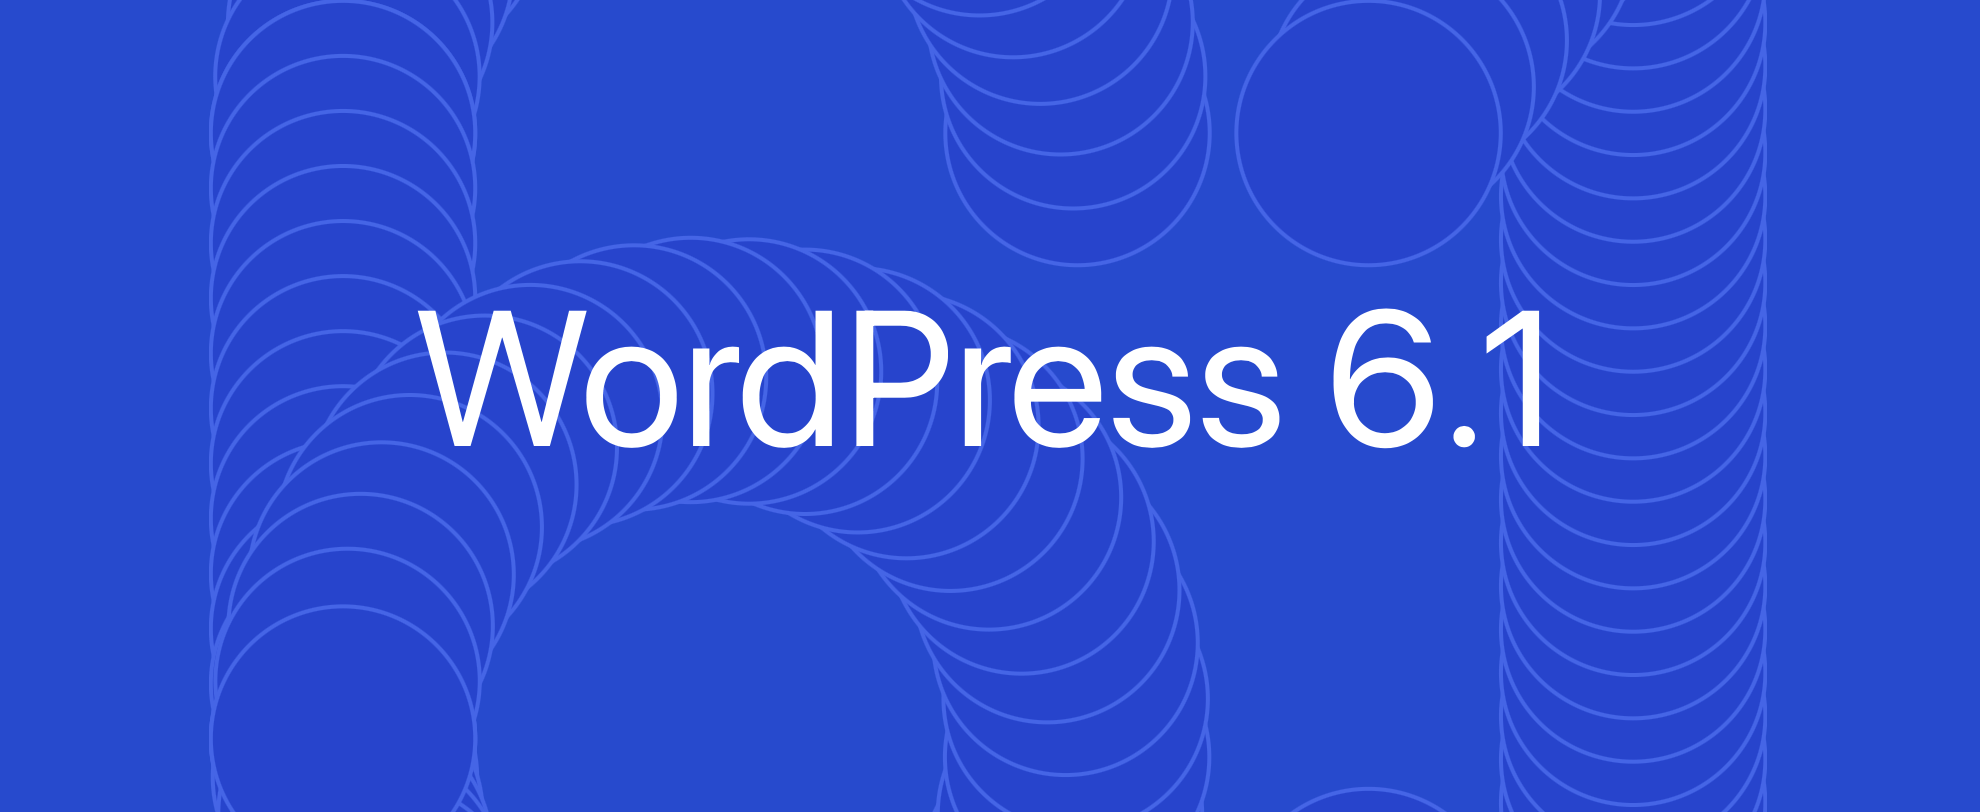 Yiion Systems is excited to announce the release of WordPress 6.1, which comes with several new features and improvements. 